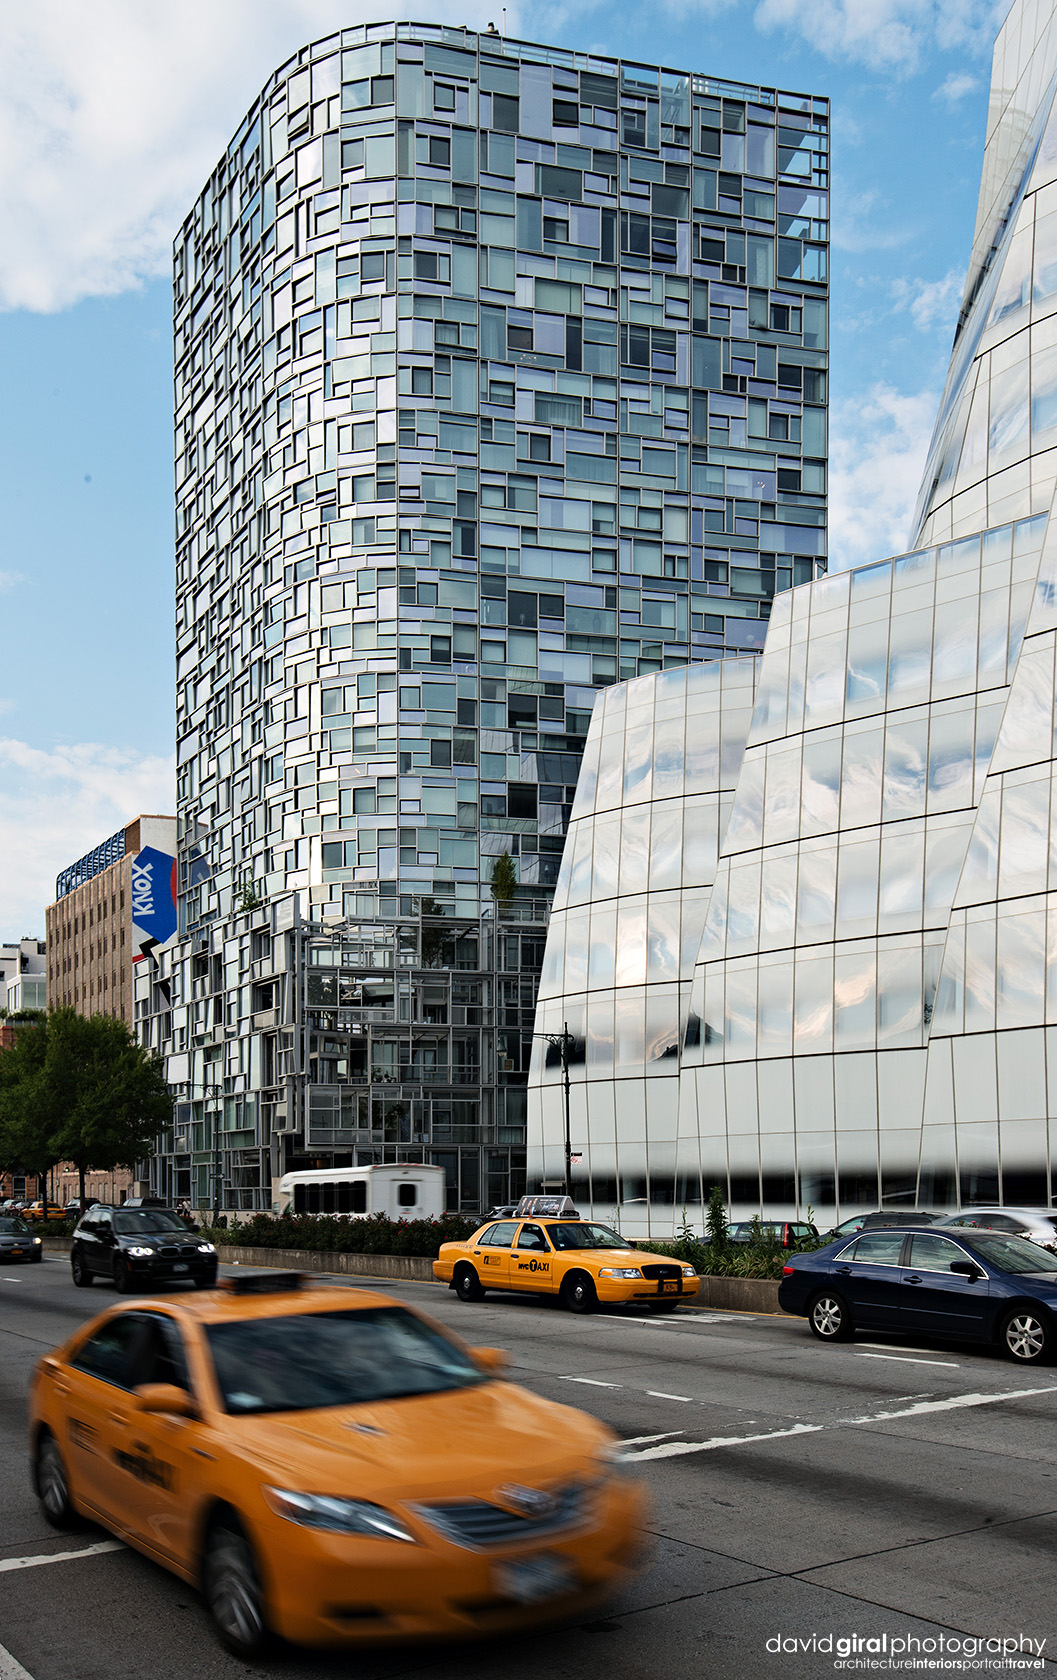 Jean Nouvel's 100 Eleventh Avenue and Frank Ghery IAC Building Nikon D800 + Nikkor 16-35mm F/4 G VRII @ 28mm | ISO100 - 1/50s - F/16.0